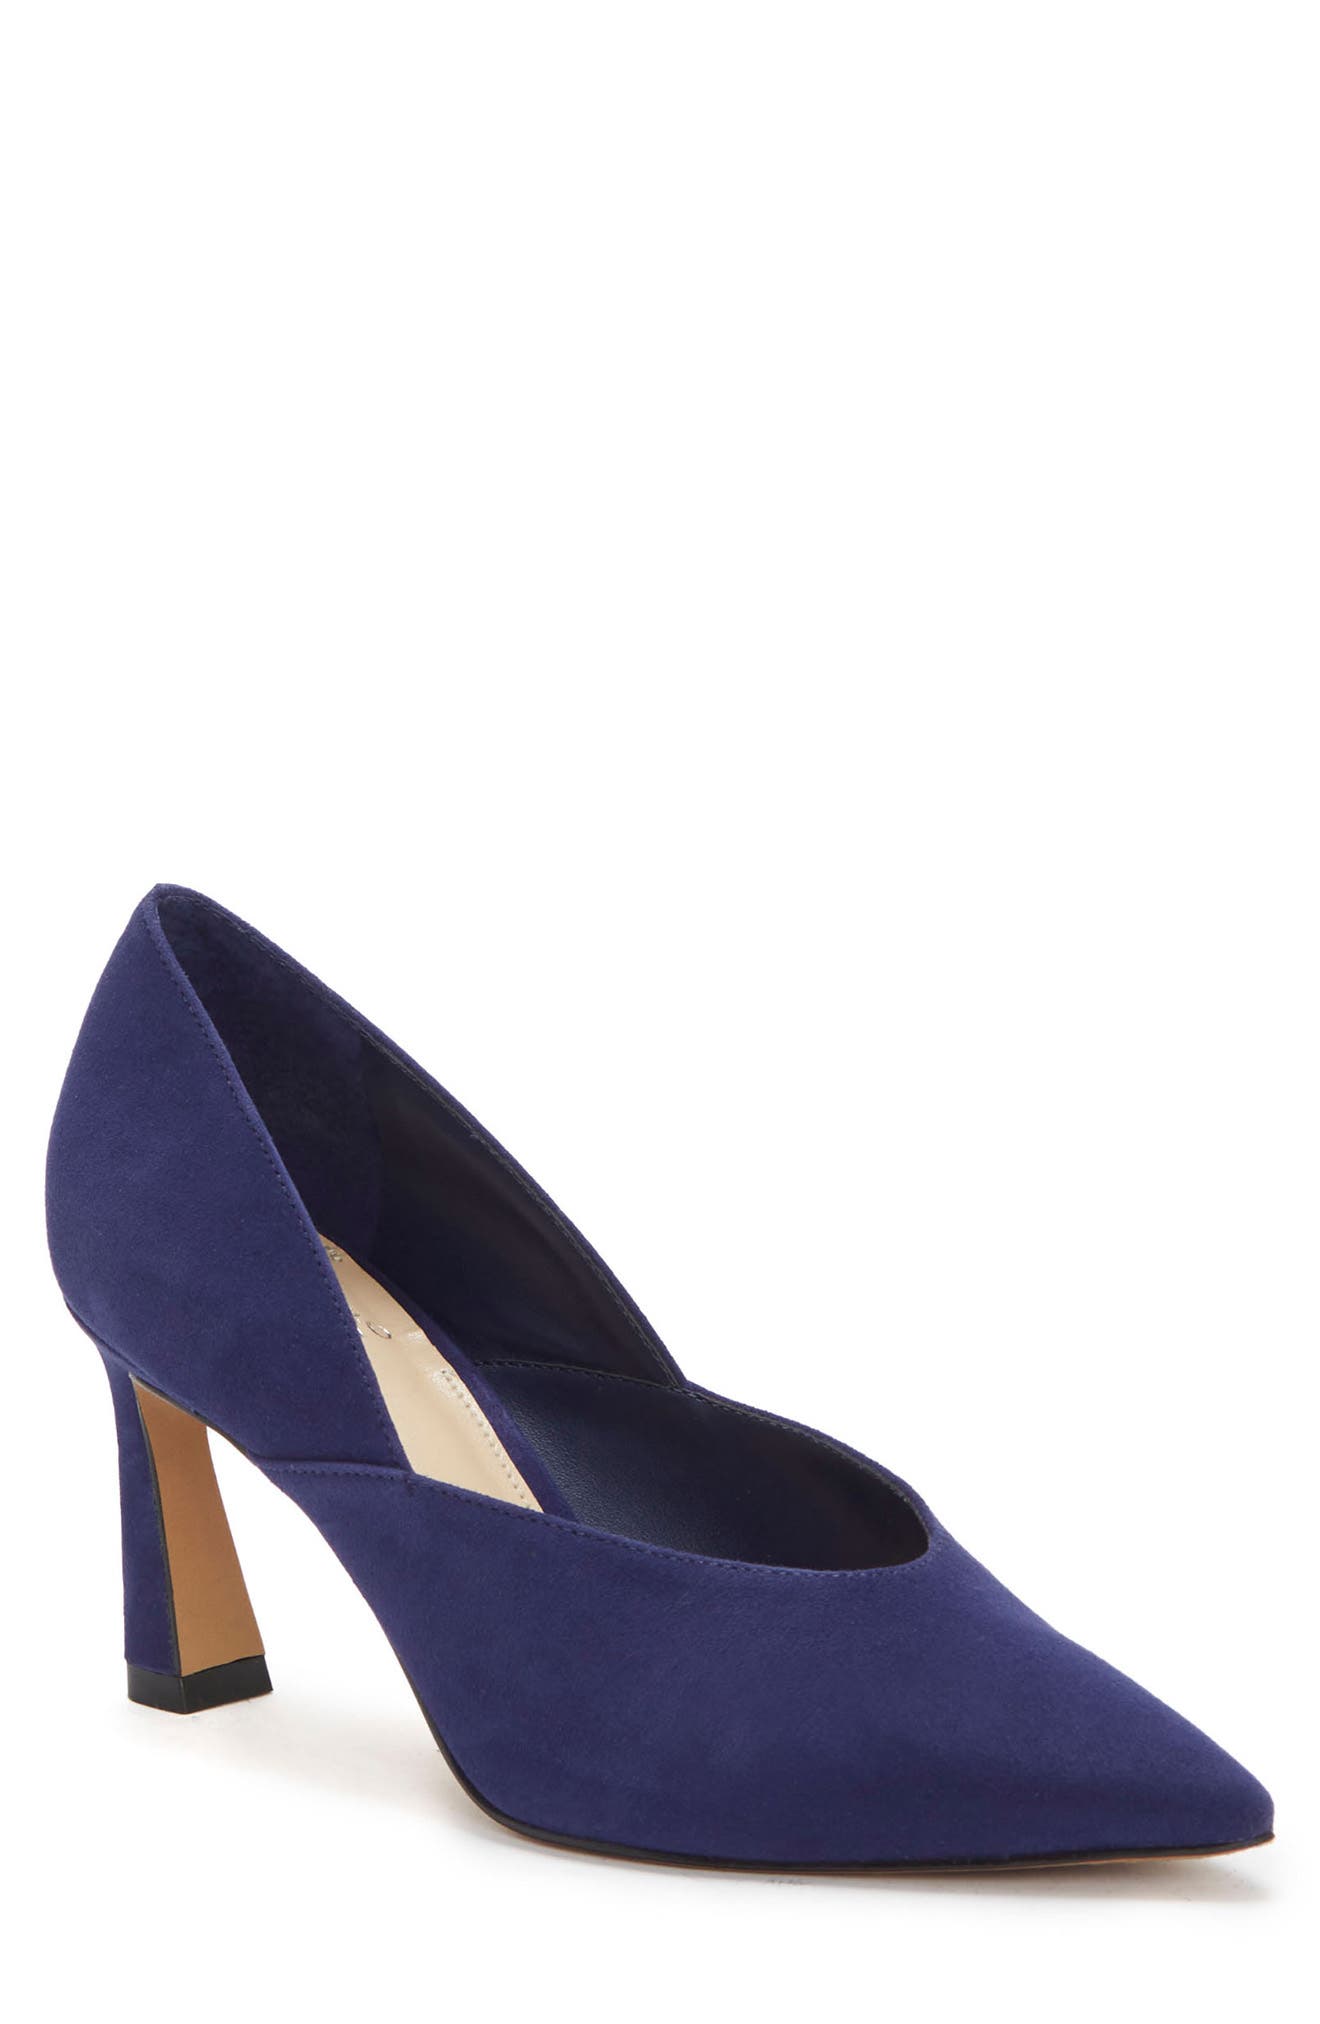 UPC 191707307360 product image for Vince Camuto Kastani Pointed Toe Pump in New Navy at Nordstrom, Size 5.5 | upcitemdb.com